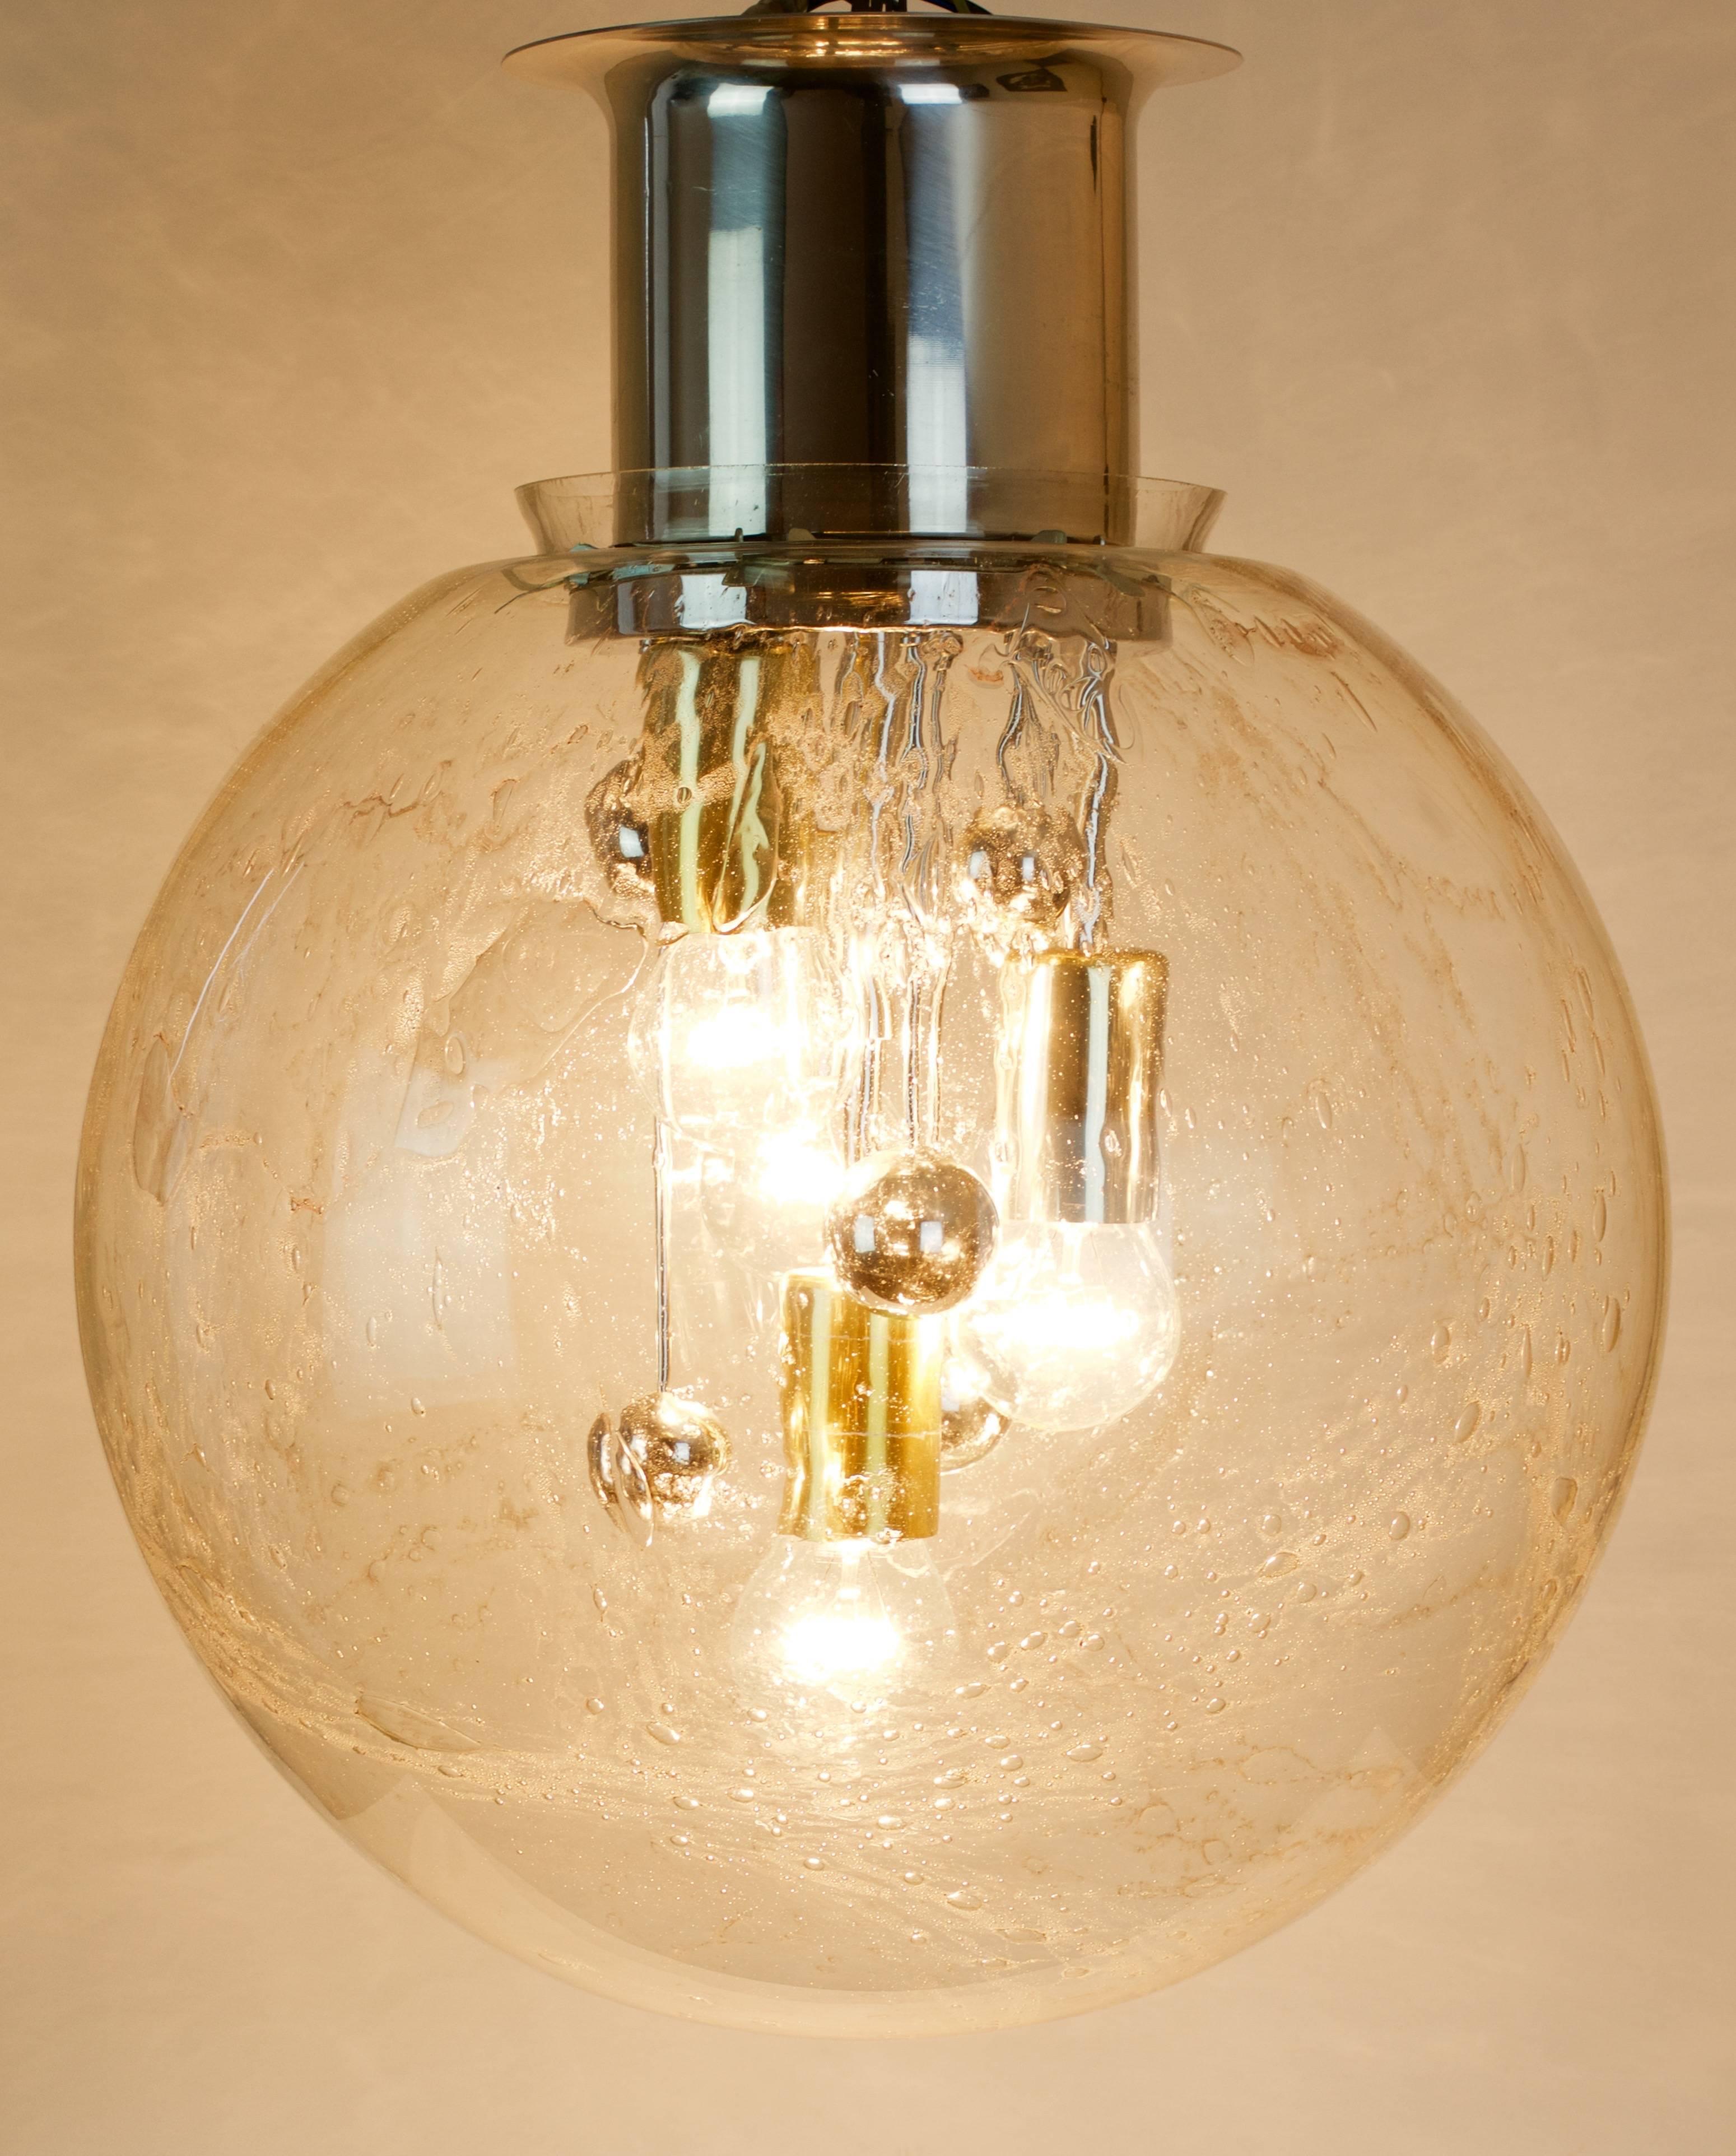 One of Three large vintage / retro / mid century modern flush mount / Chandelier Pendant light fixtures by Doria Leuchten, Germany, circa 1965-1975. The huge mouth-blown Murano glass globe features pockets of air bubbles which refract the light